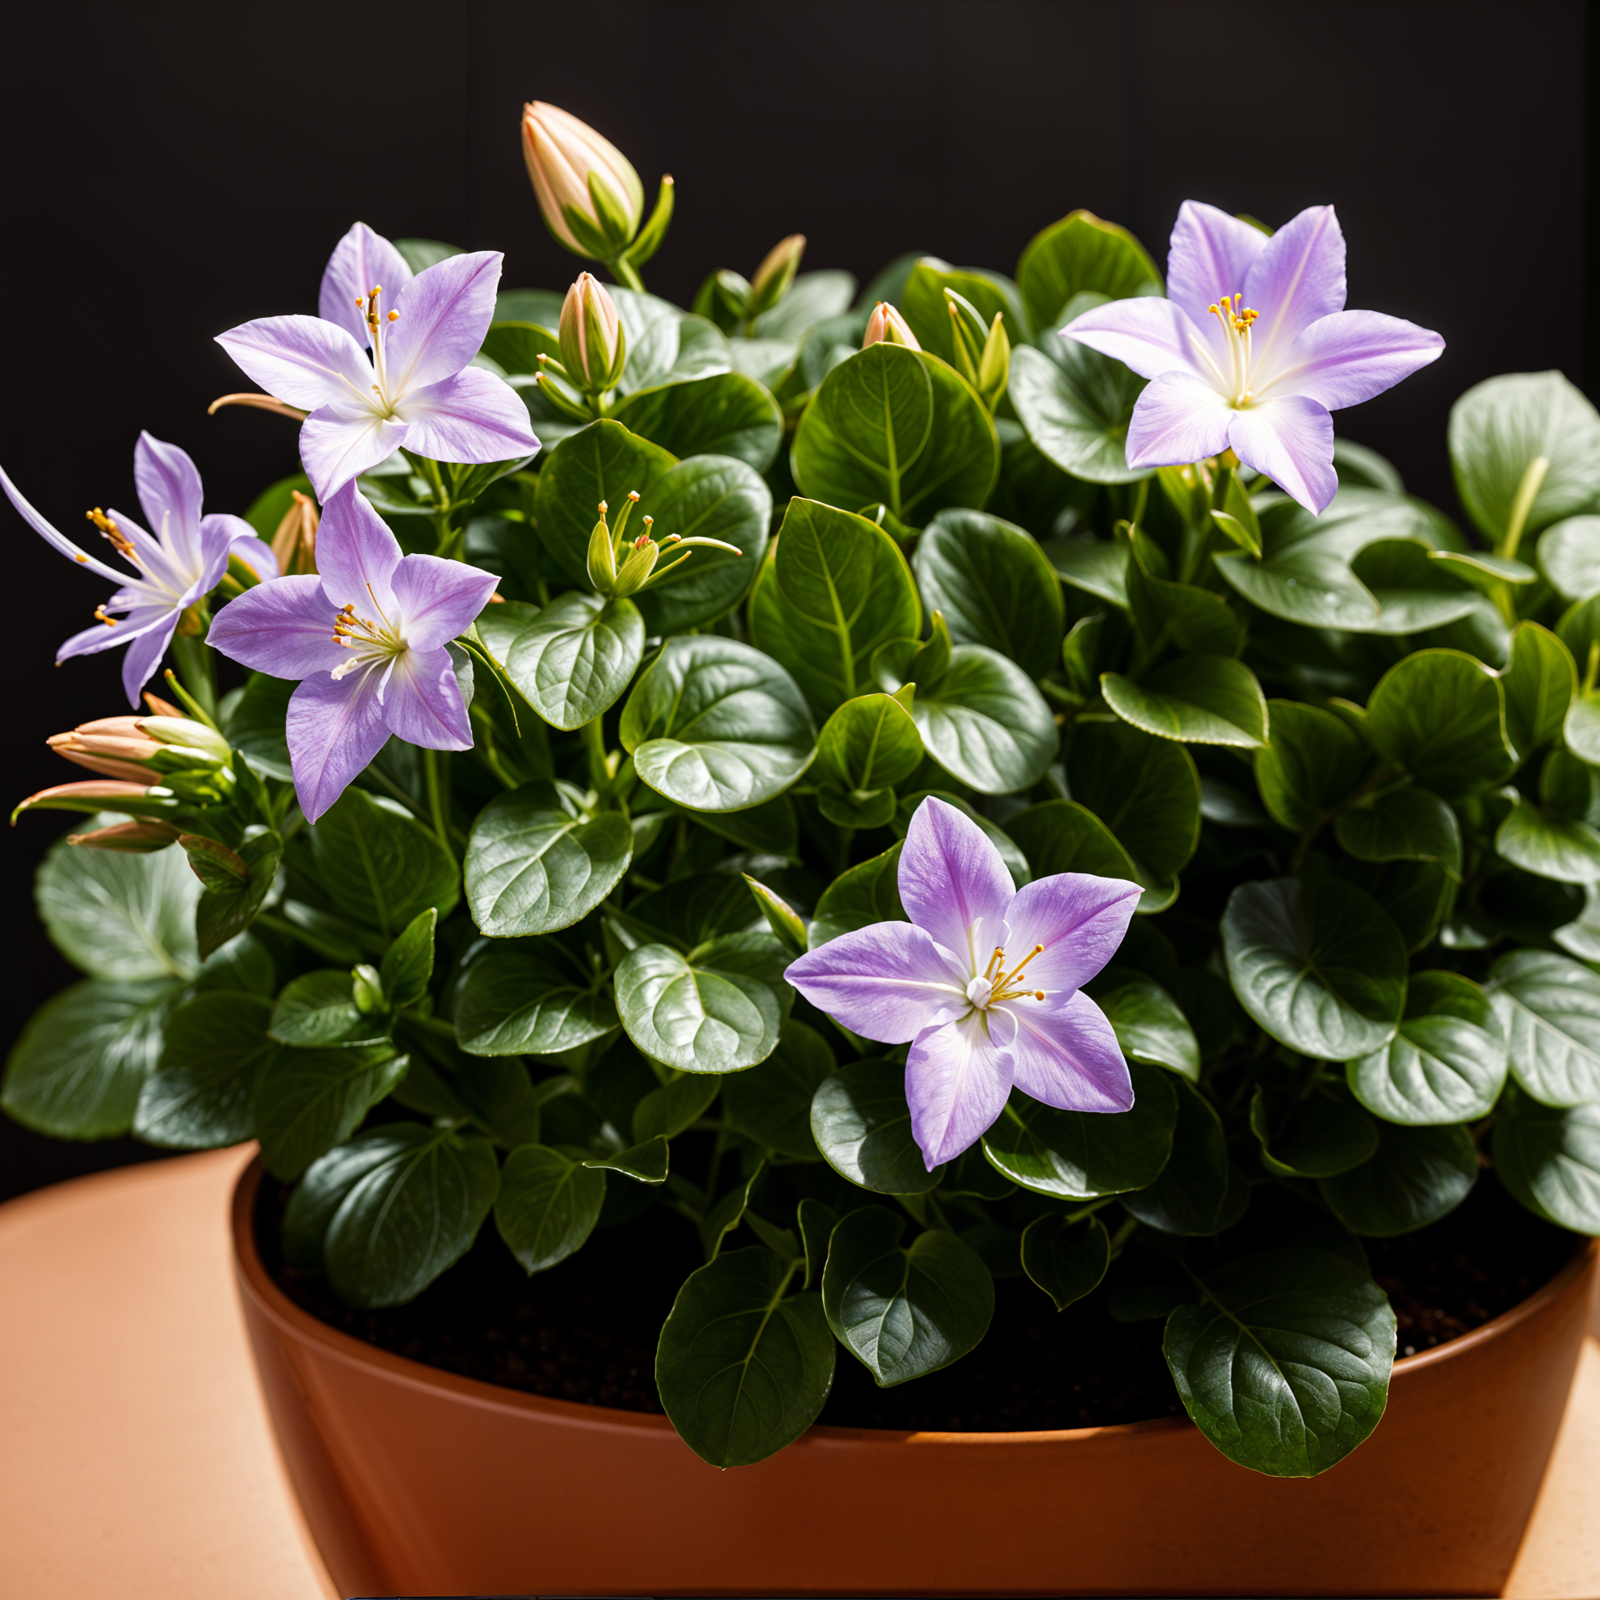 Campanula isophylla, a detailed plant with flowers, in a planter under clear indoor lighting.